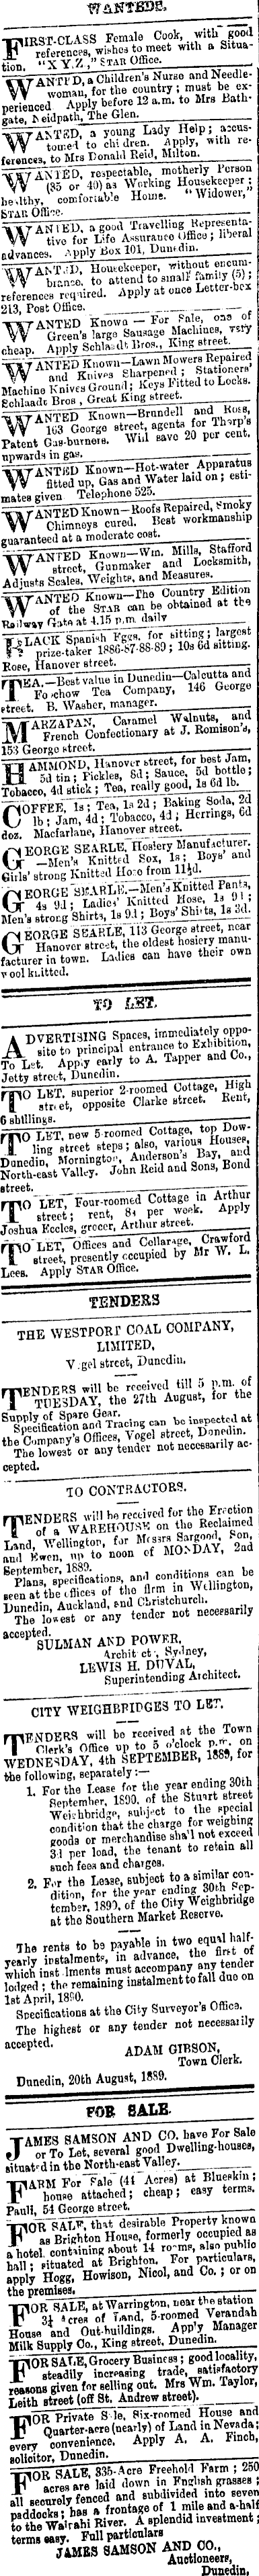 Papers Past Newspapers Evening Star 26 August 1889 Page 1 Advertisements Column 1